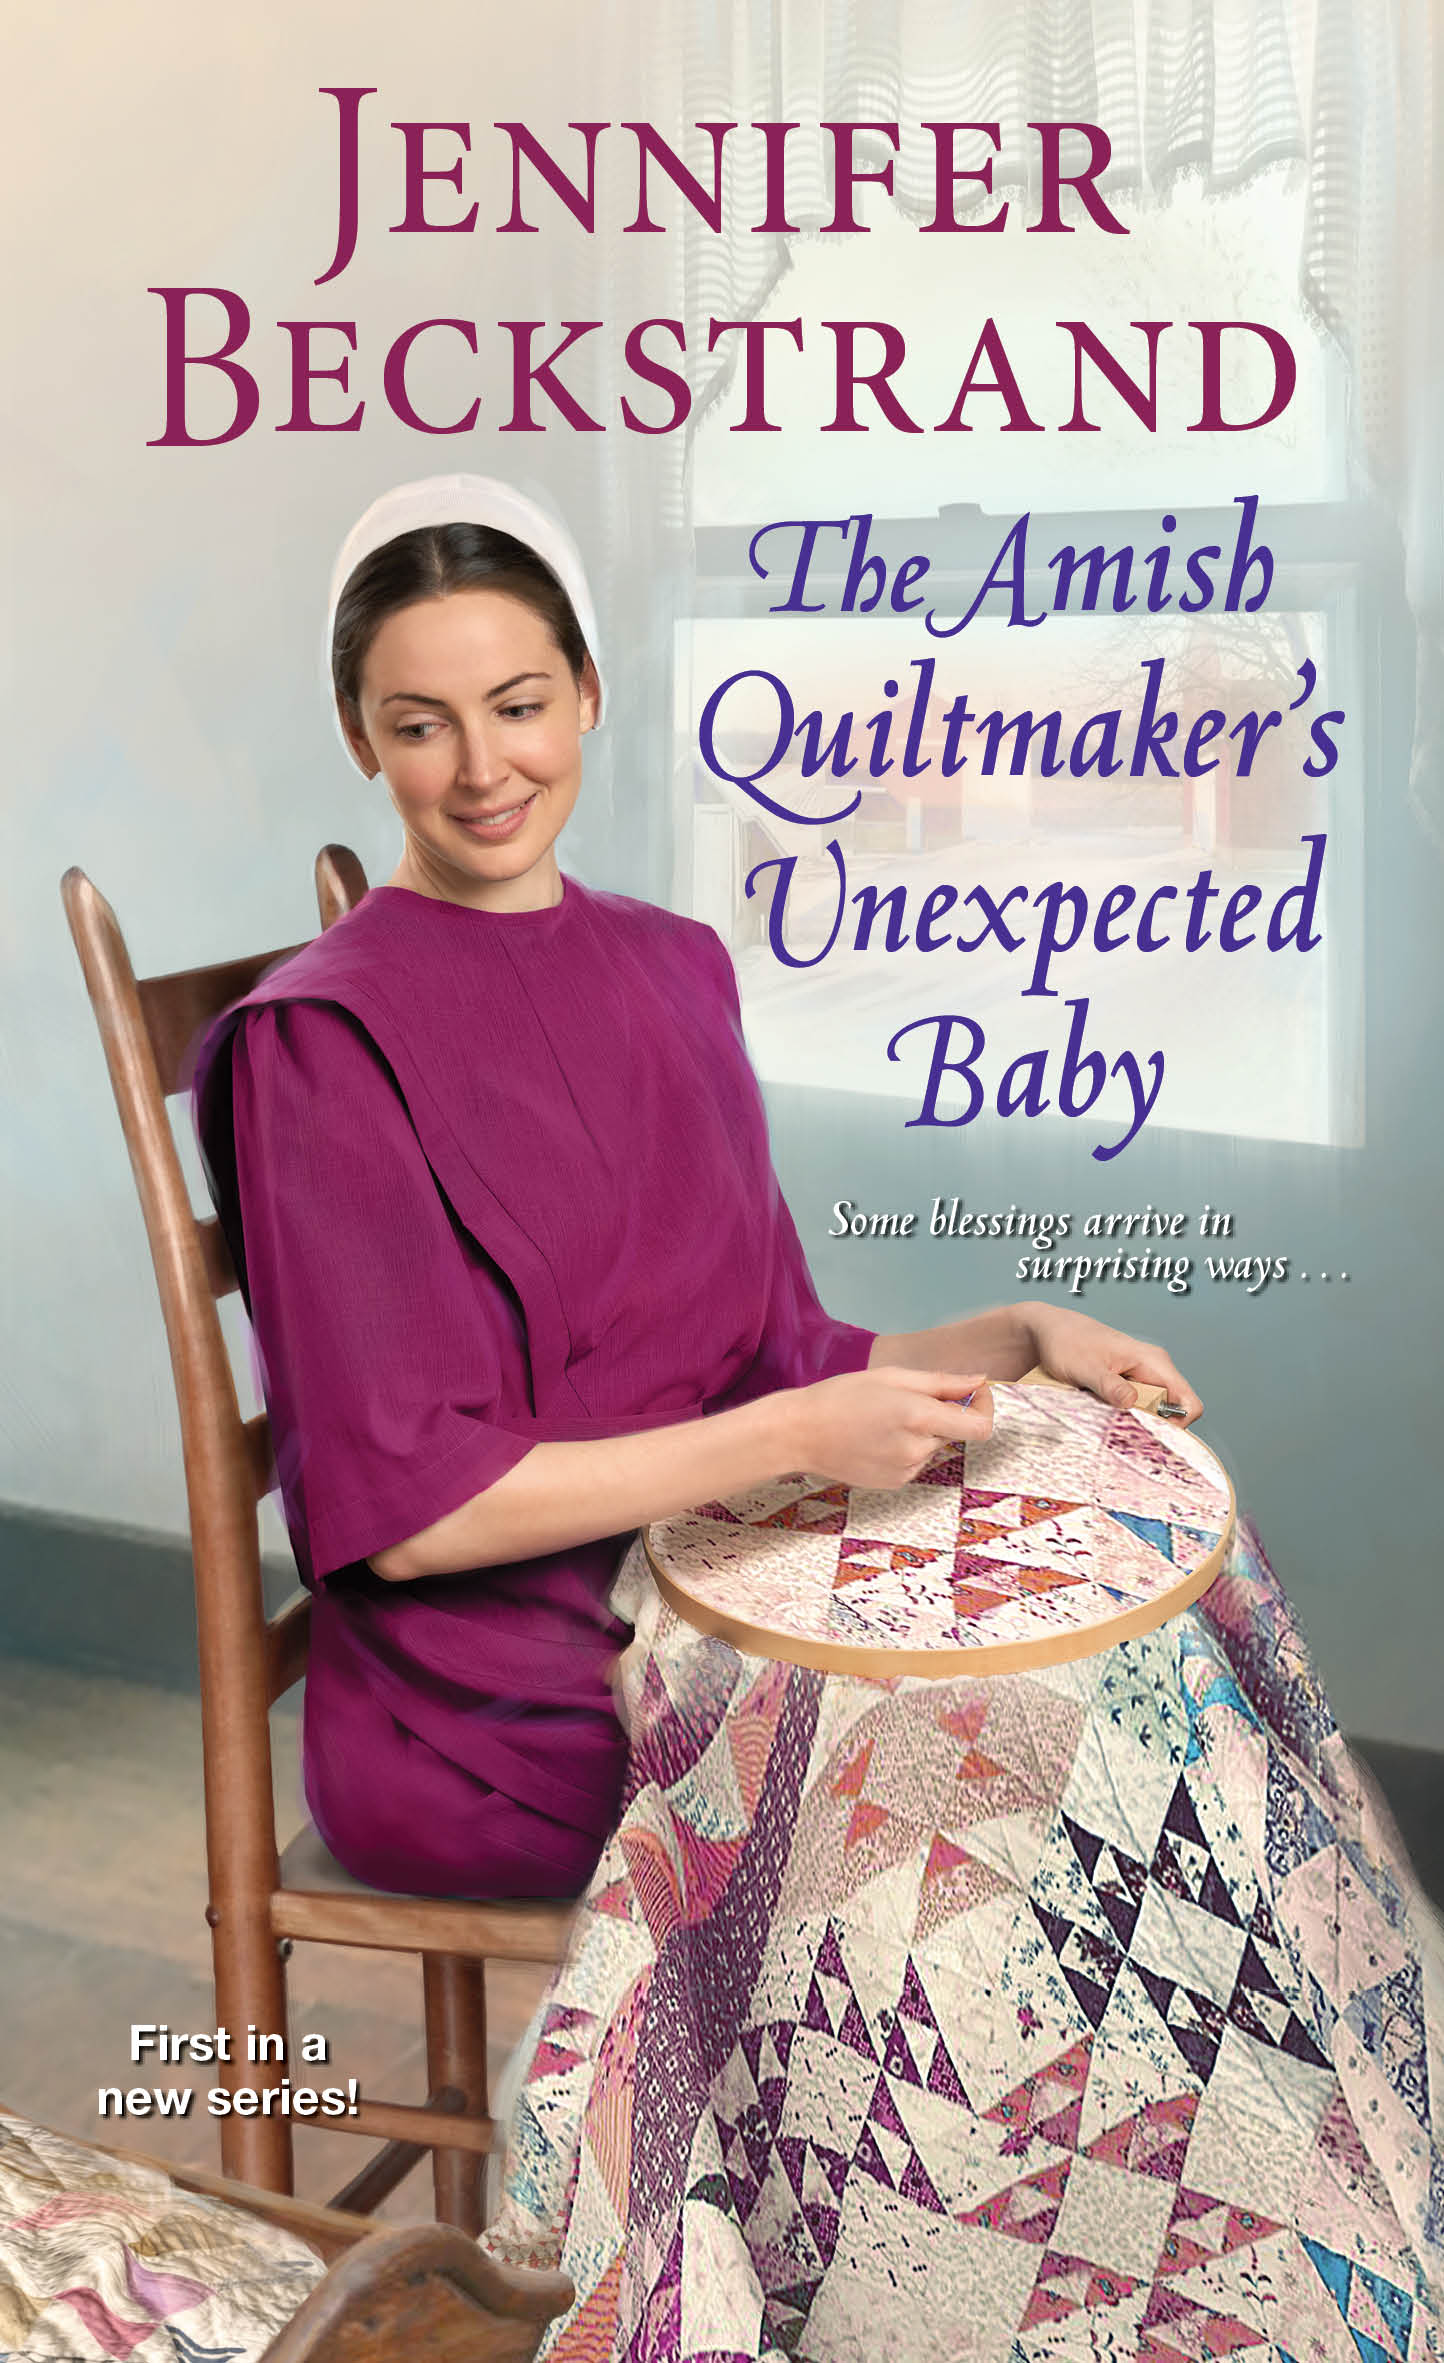 Umschlagbild für The Amish Quiltmaker's Unexpected Baby [electronic resource] :